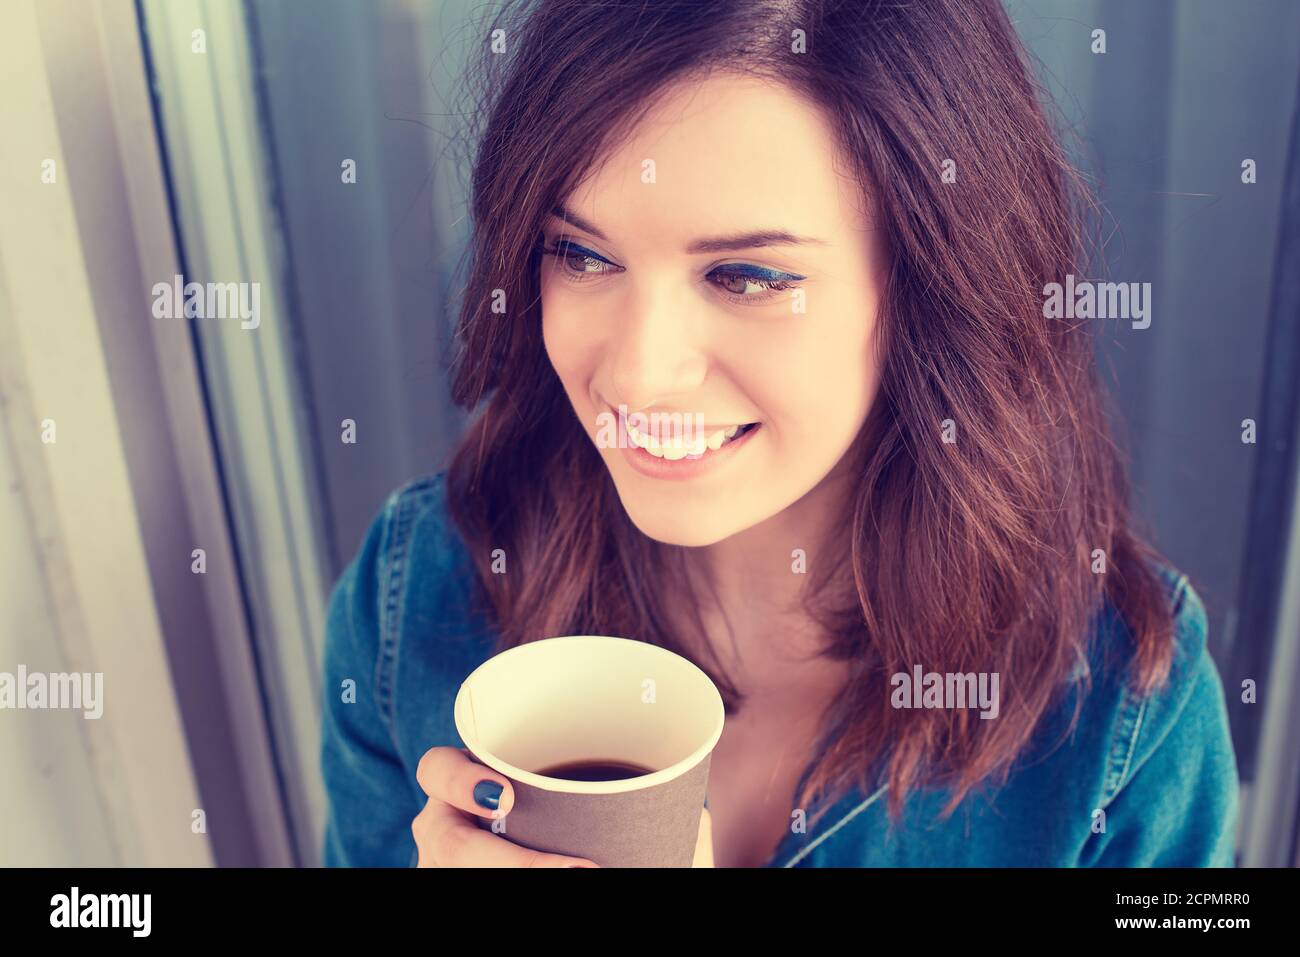 Smiling woman drinking coffee outdoors holding paper cup Stock Photo